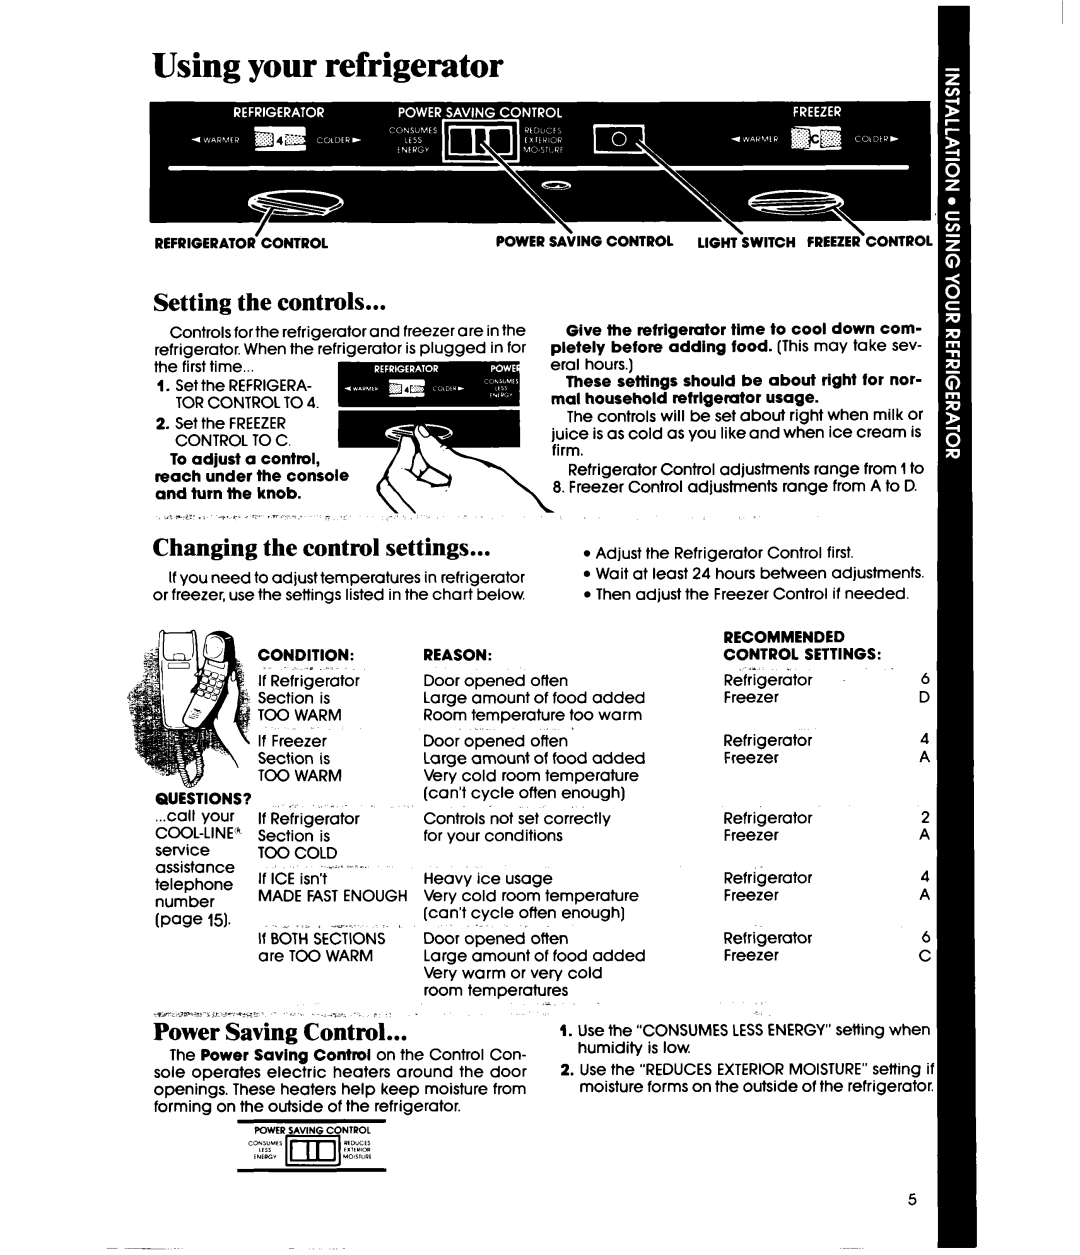 Whirlpool ET20GM manual Using your refrigerator, Setting the controls, Changing the control settings 